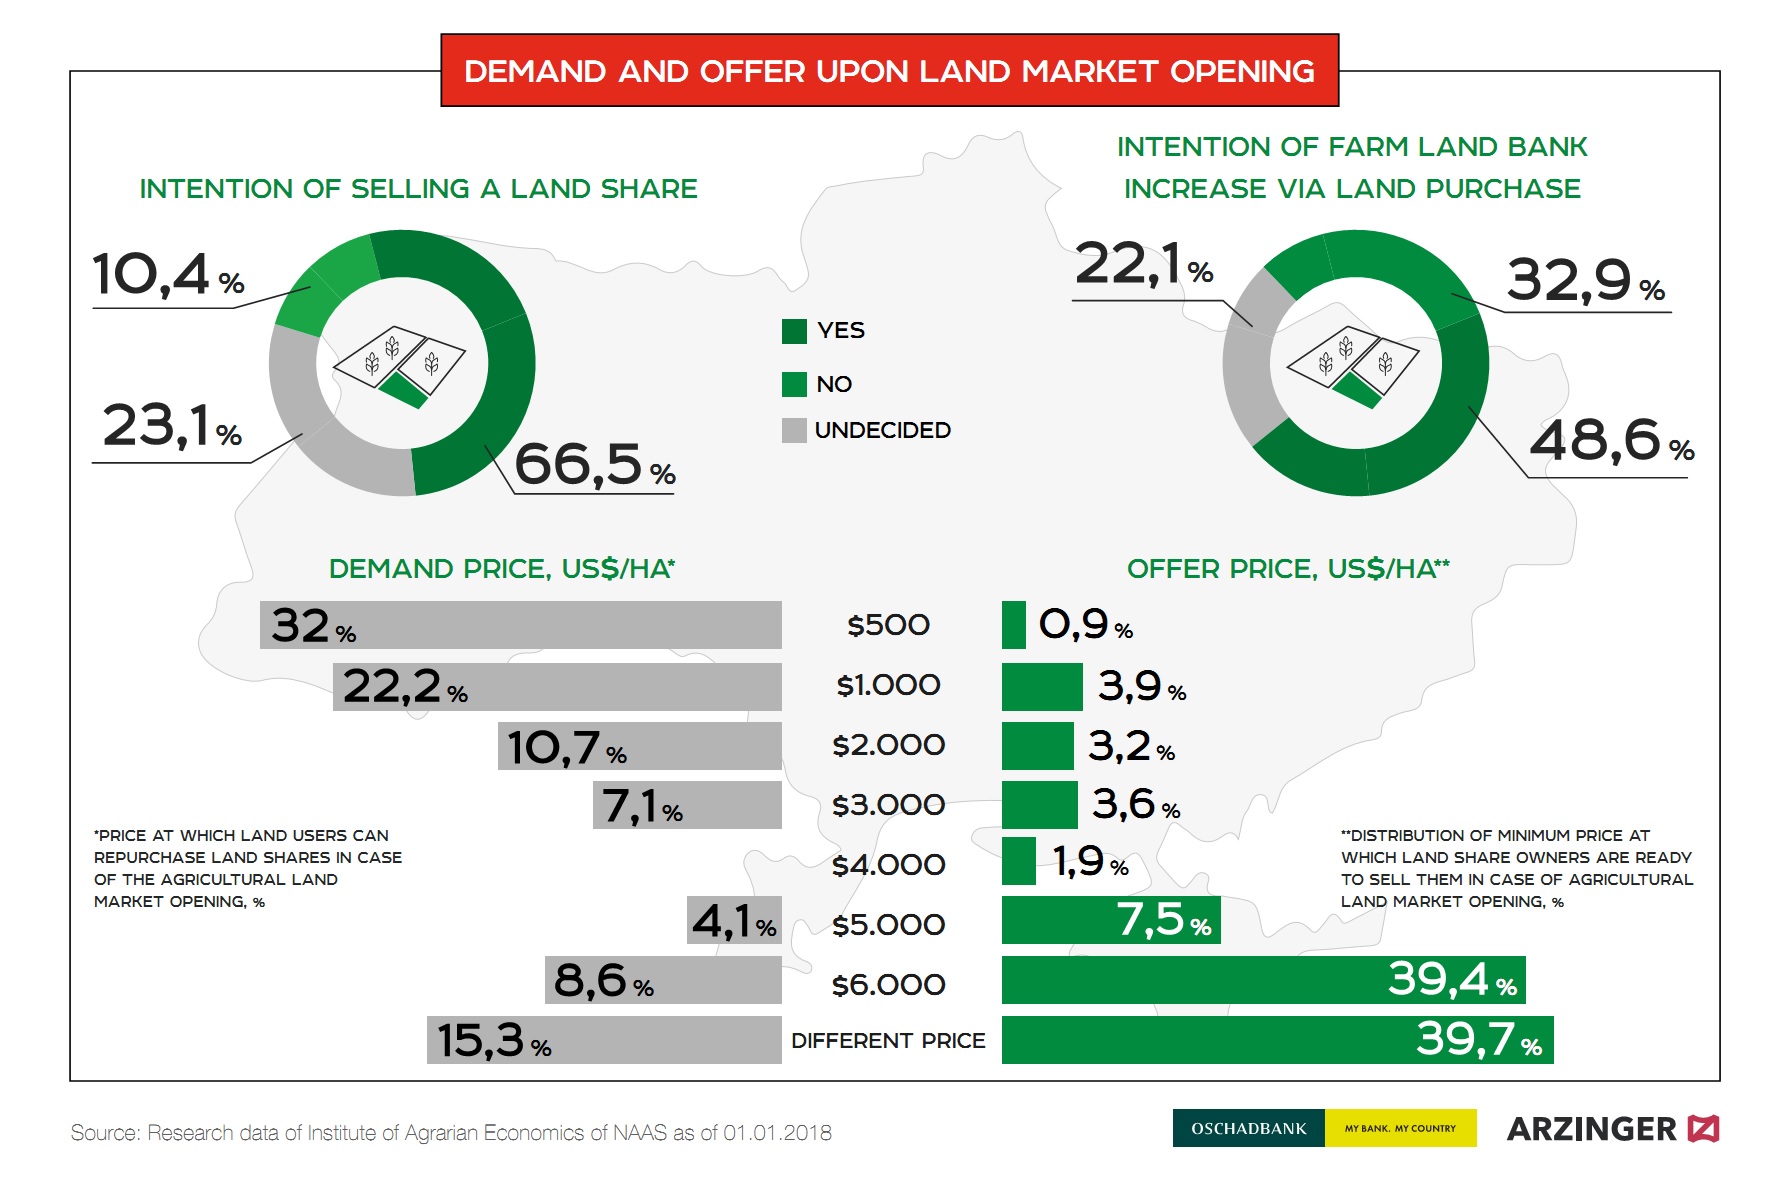 Demand and offer upon land market opening in Ukraine (click for full resolution)